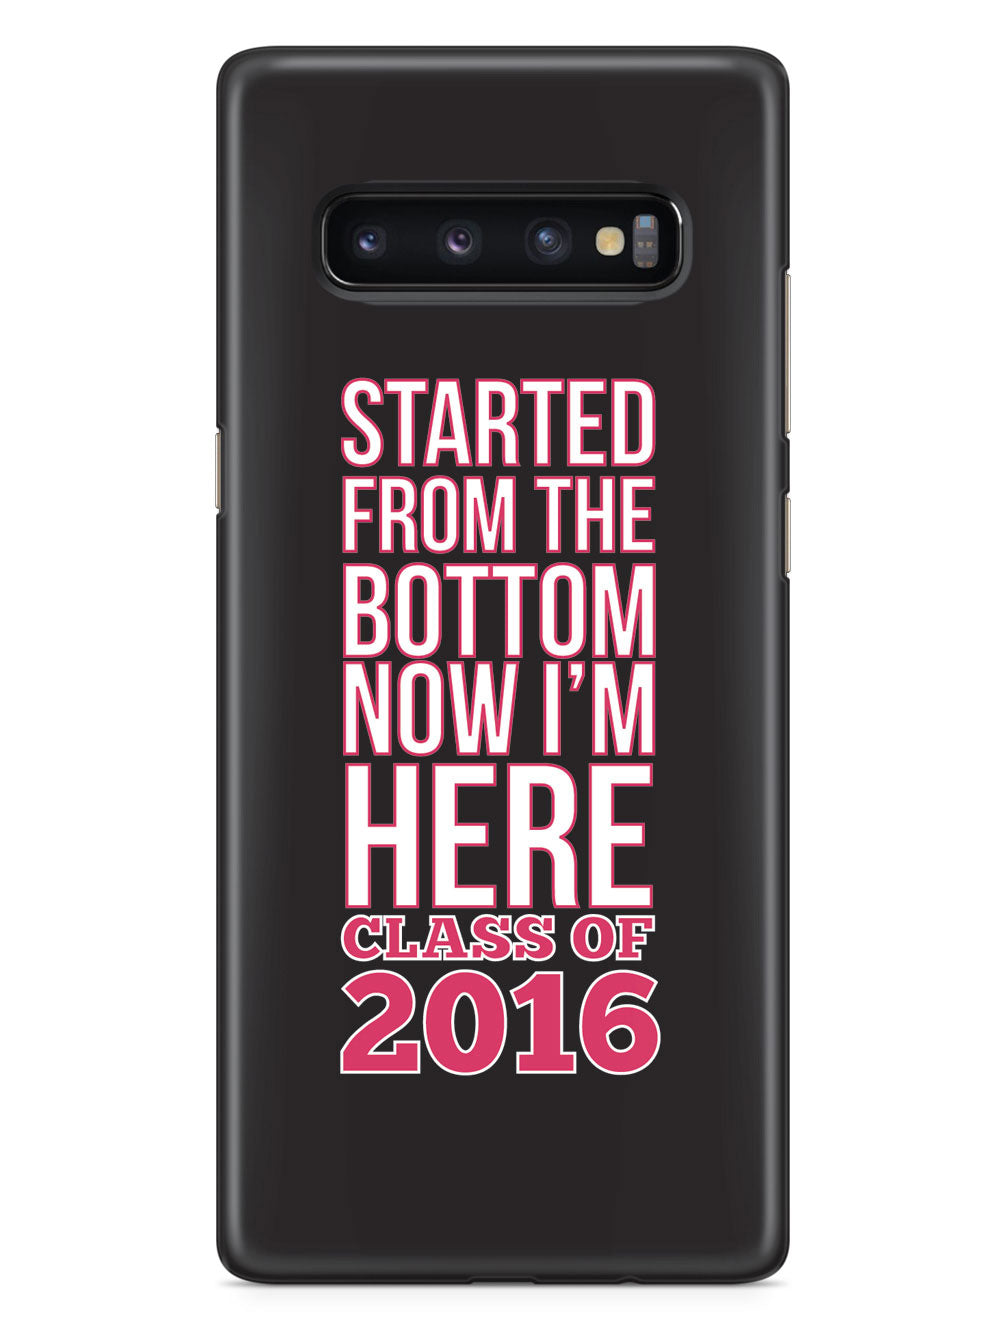 Now I'm Here - Class of 2016 Case